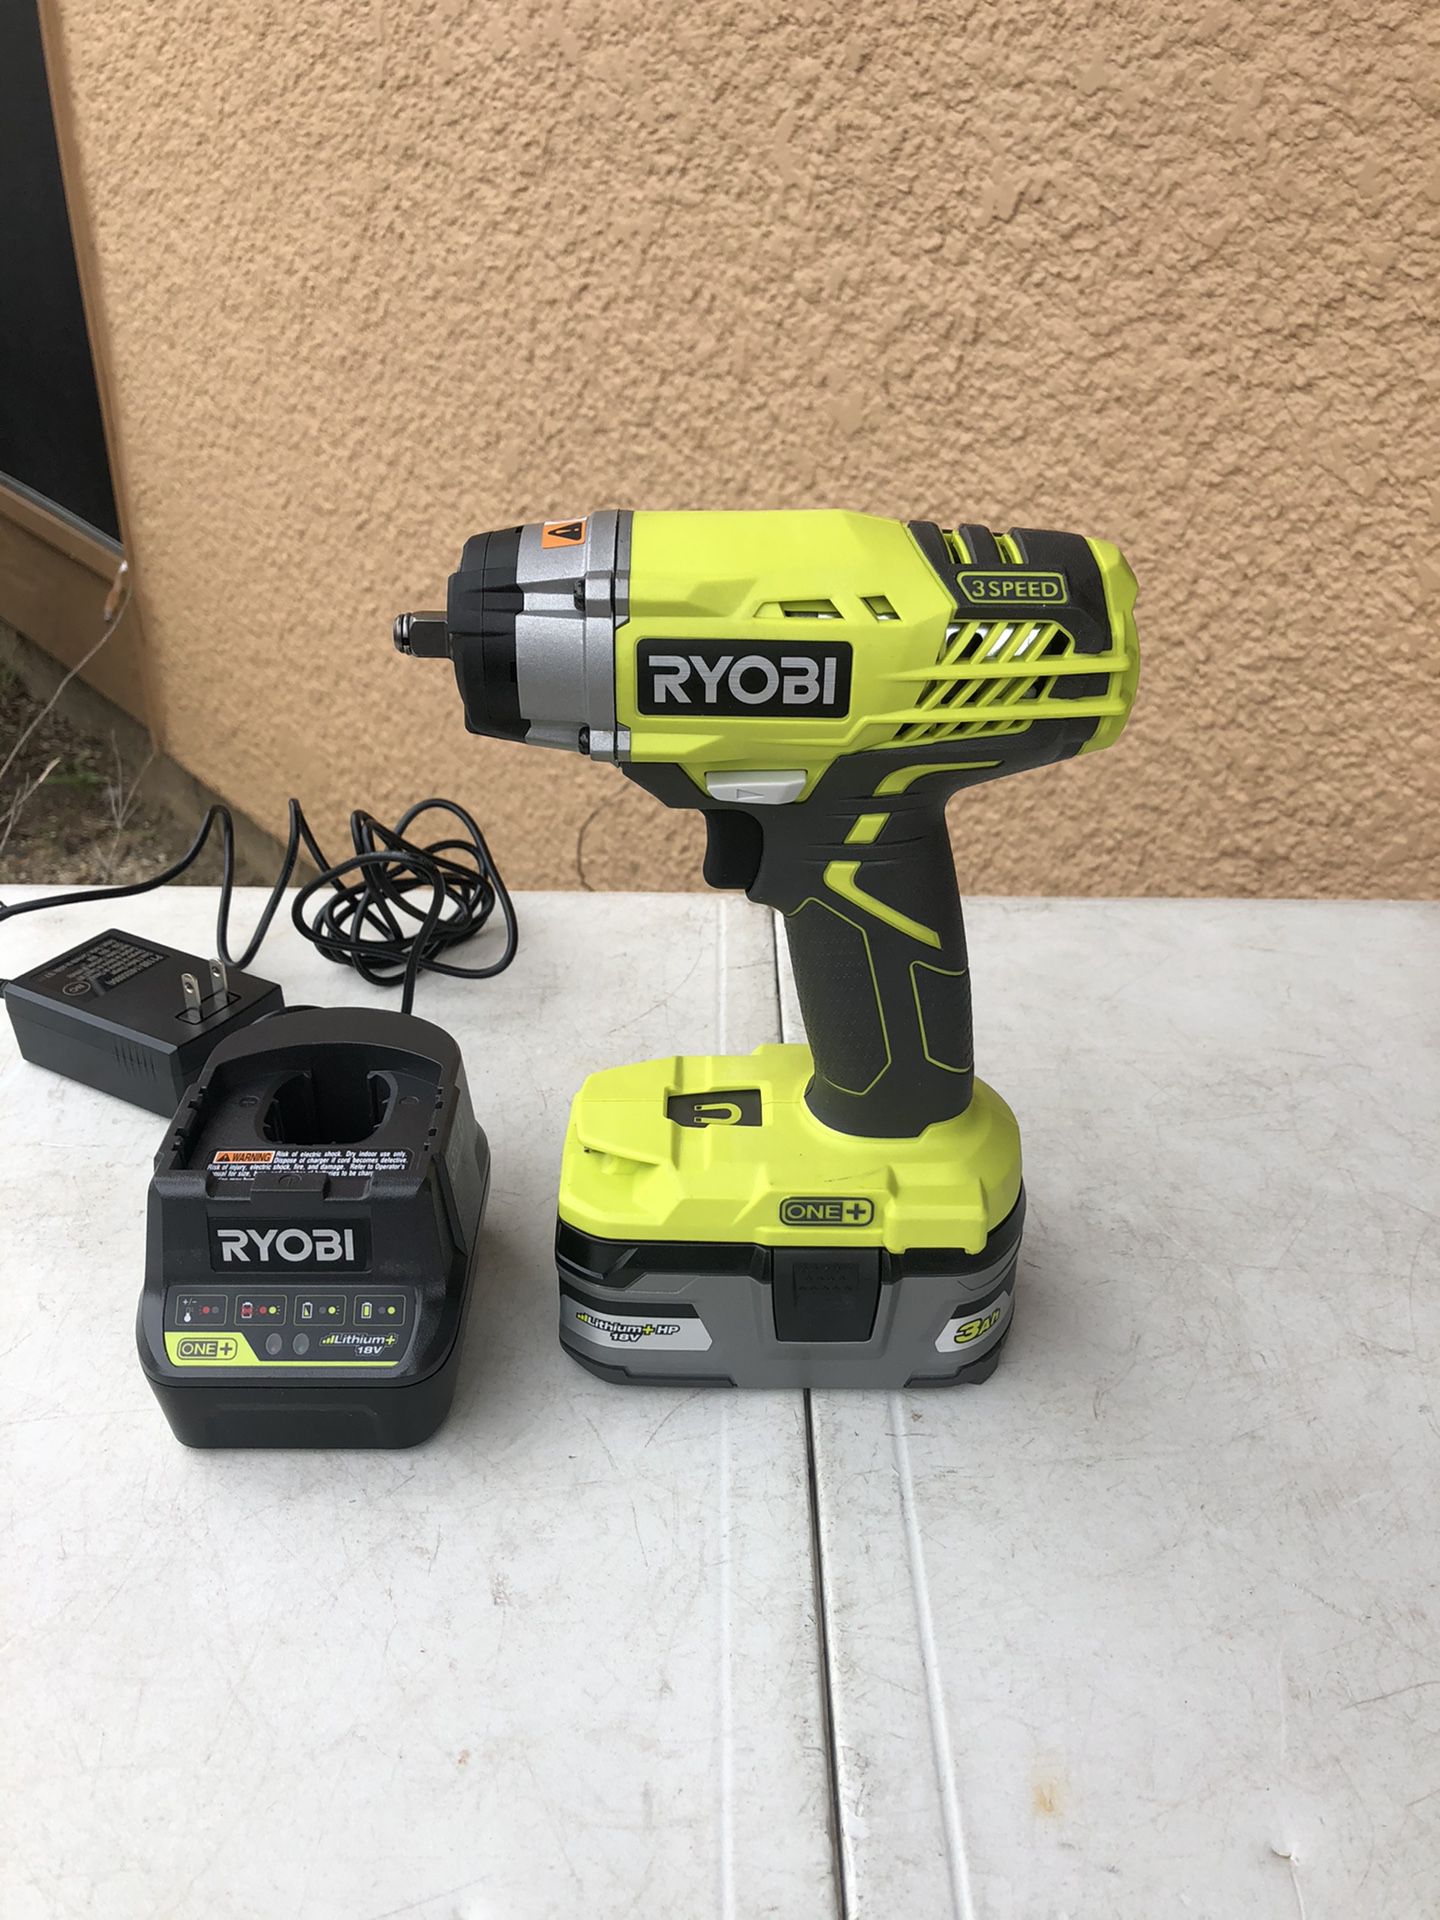 Ryobi 18volts 3/8 impact drill 3 speed New with battery 3.0 an charged $135